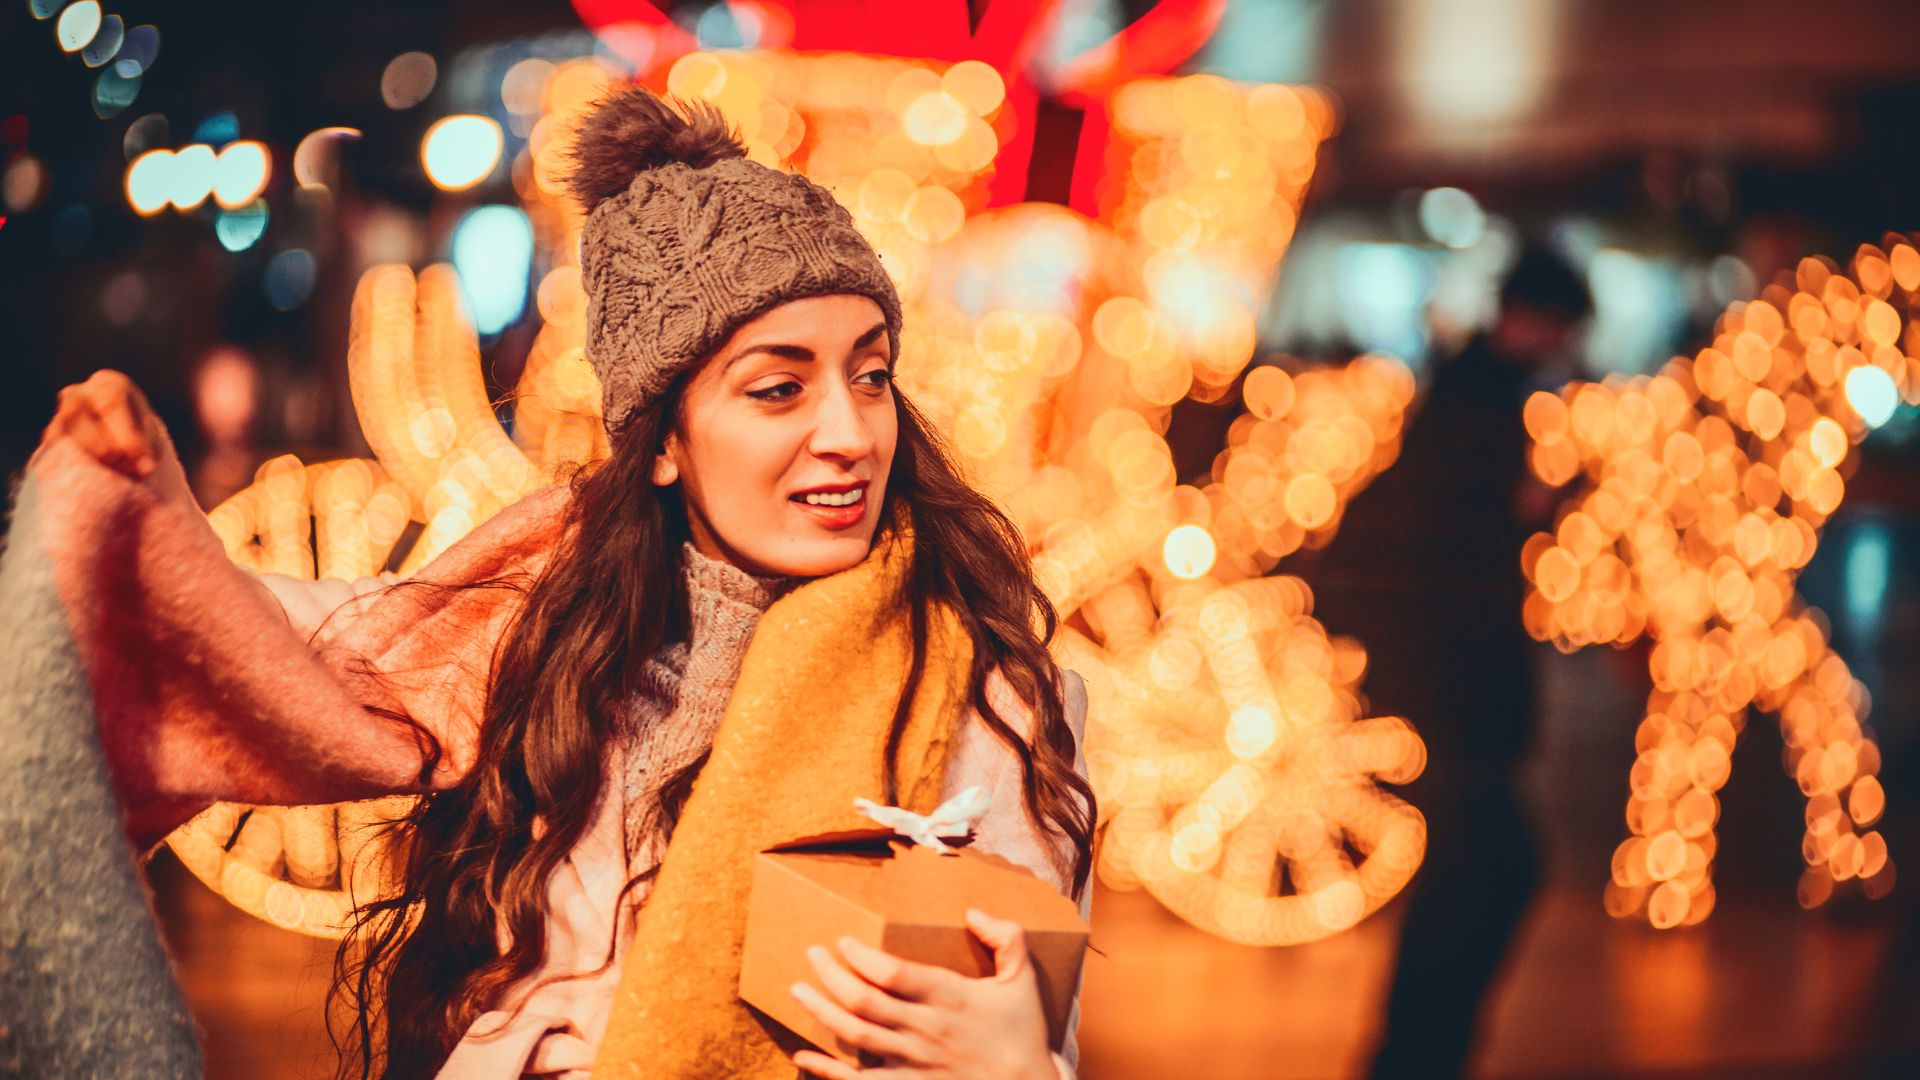 Woman in winter coat with scarf outside shop with bright sparkling lights